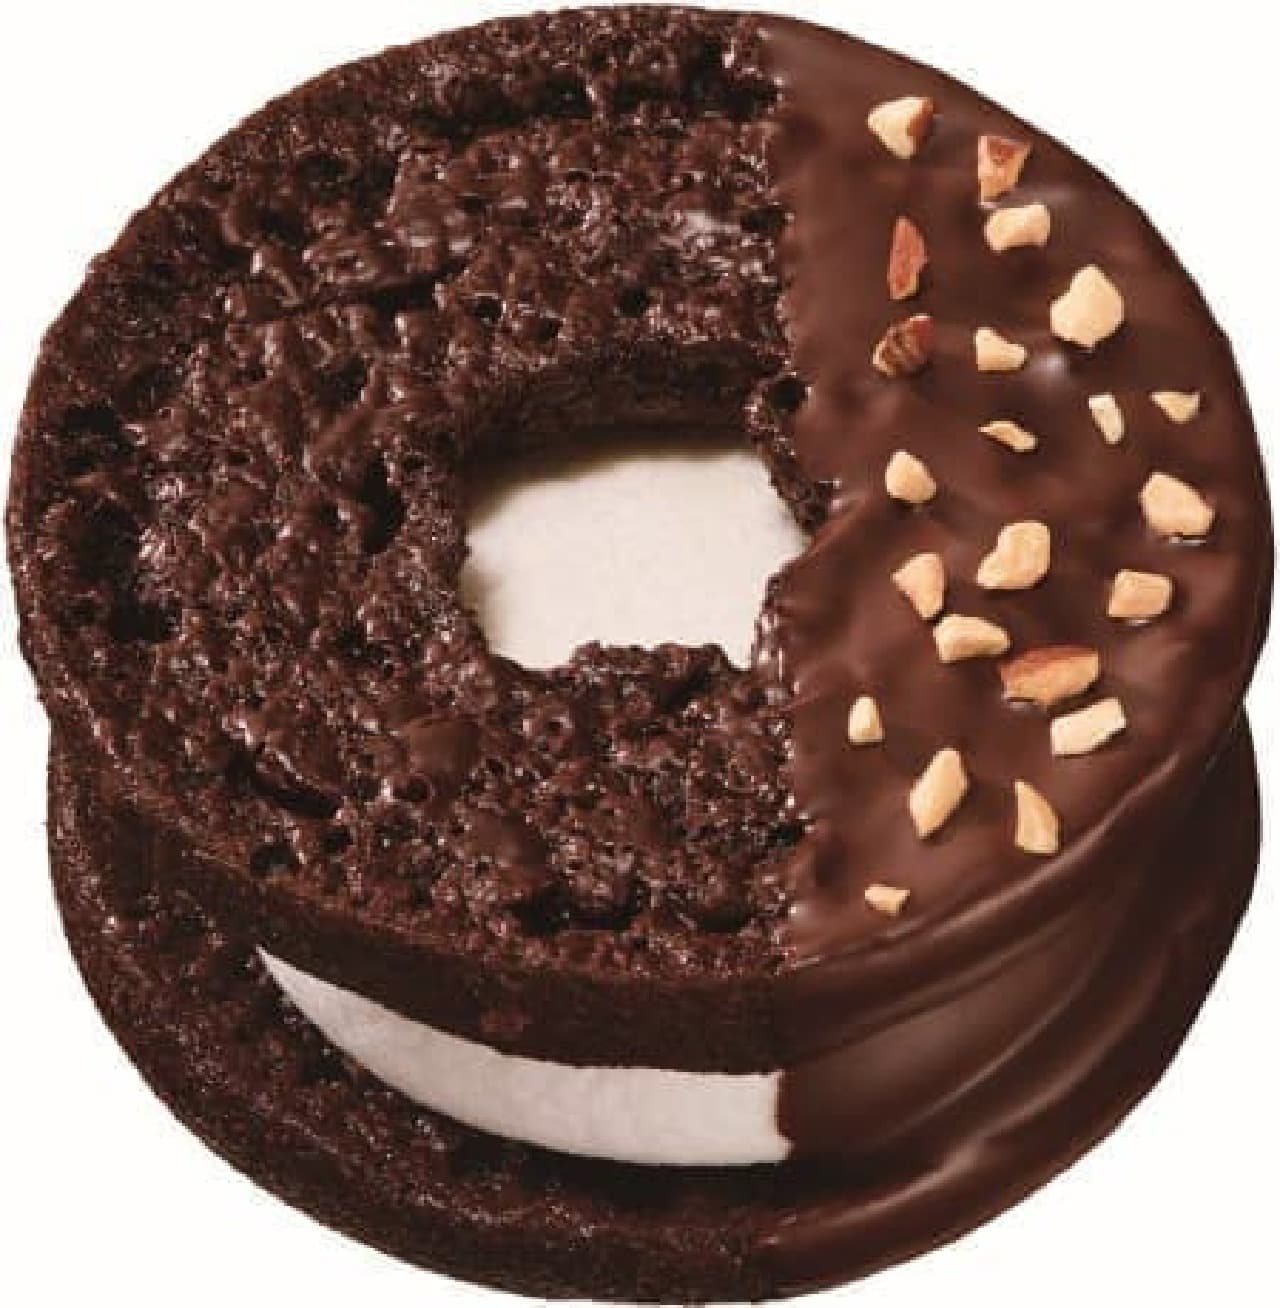 Mister Donut "Grilled Marshmallow Chocolate"